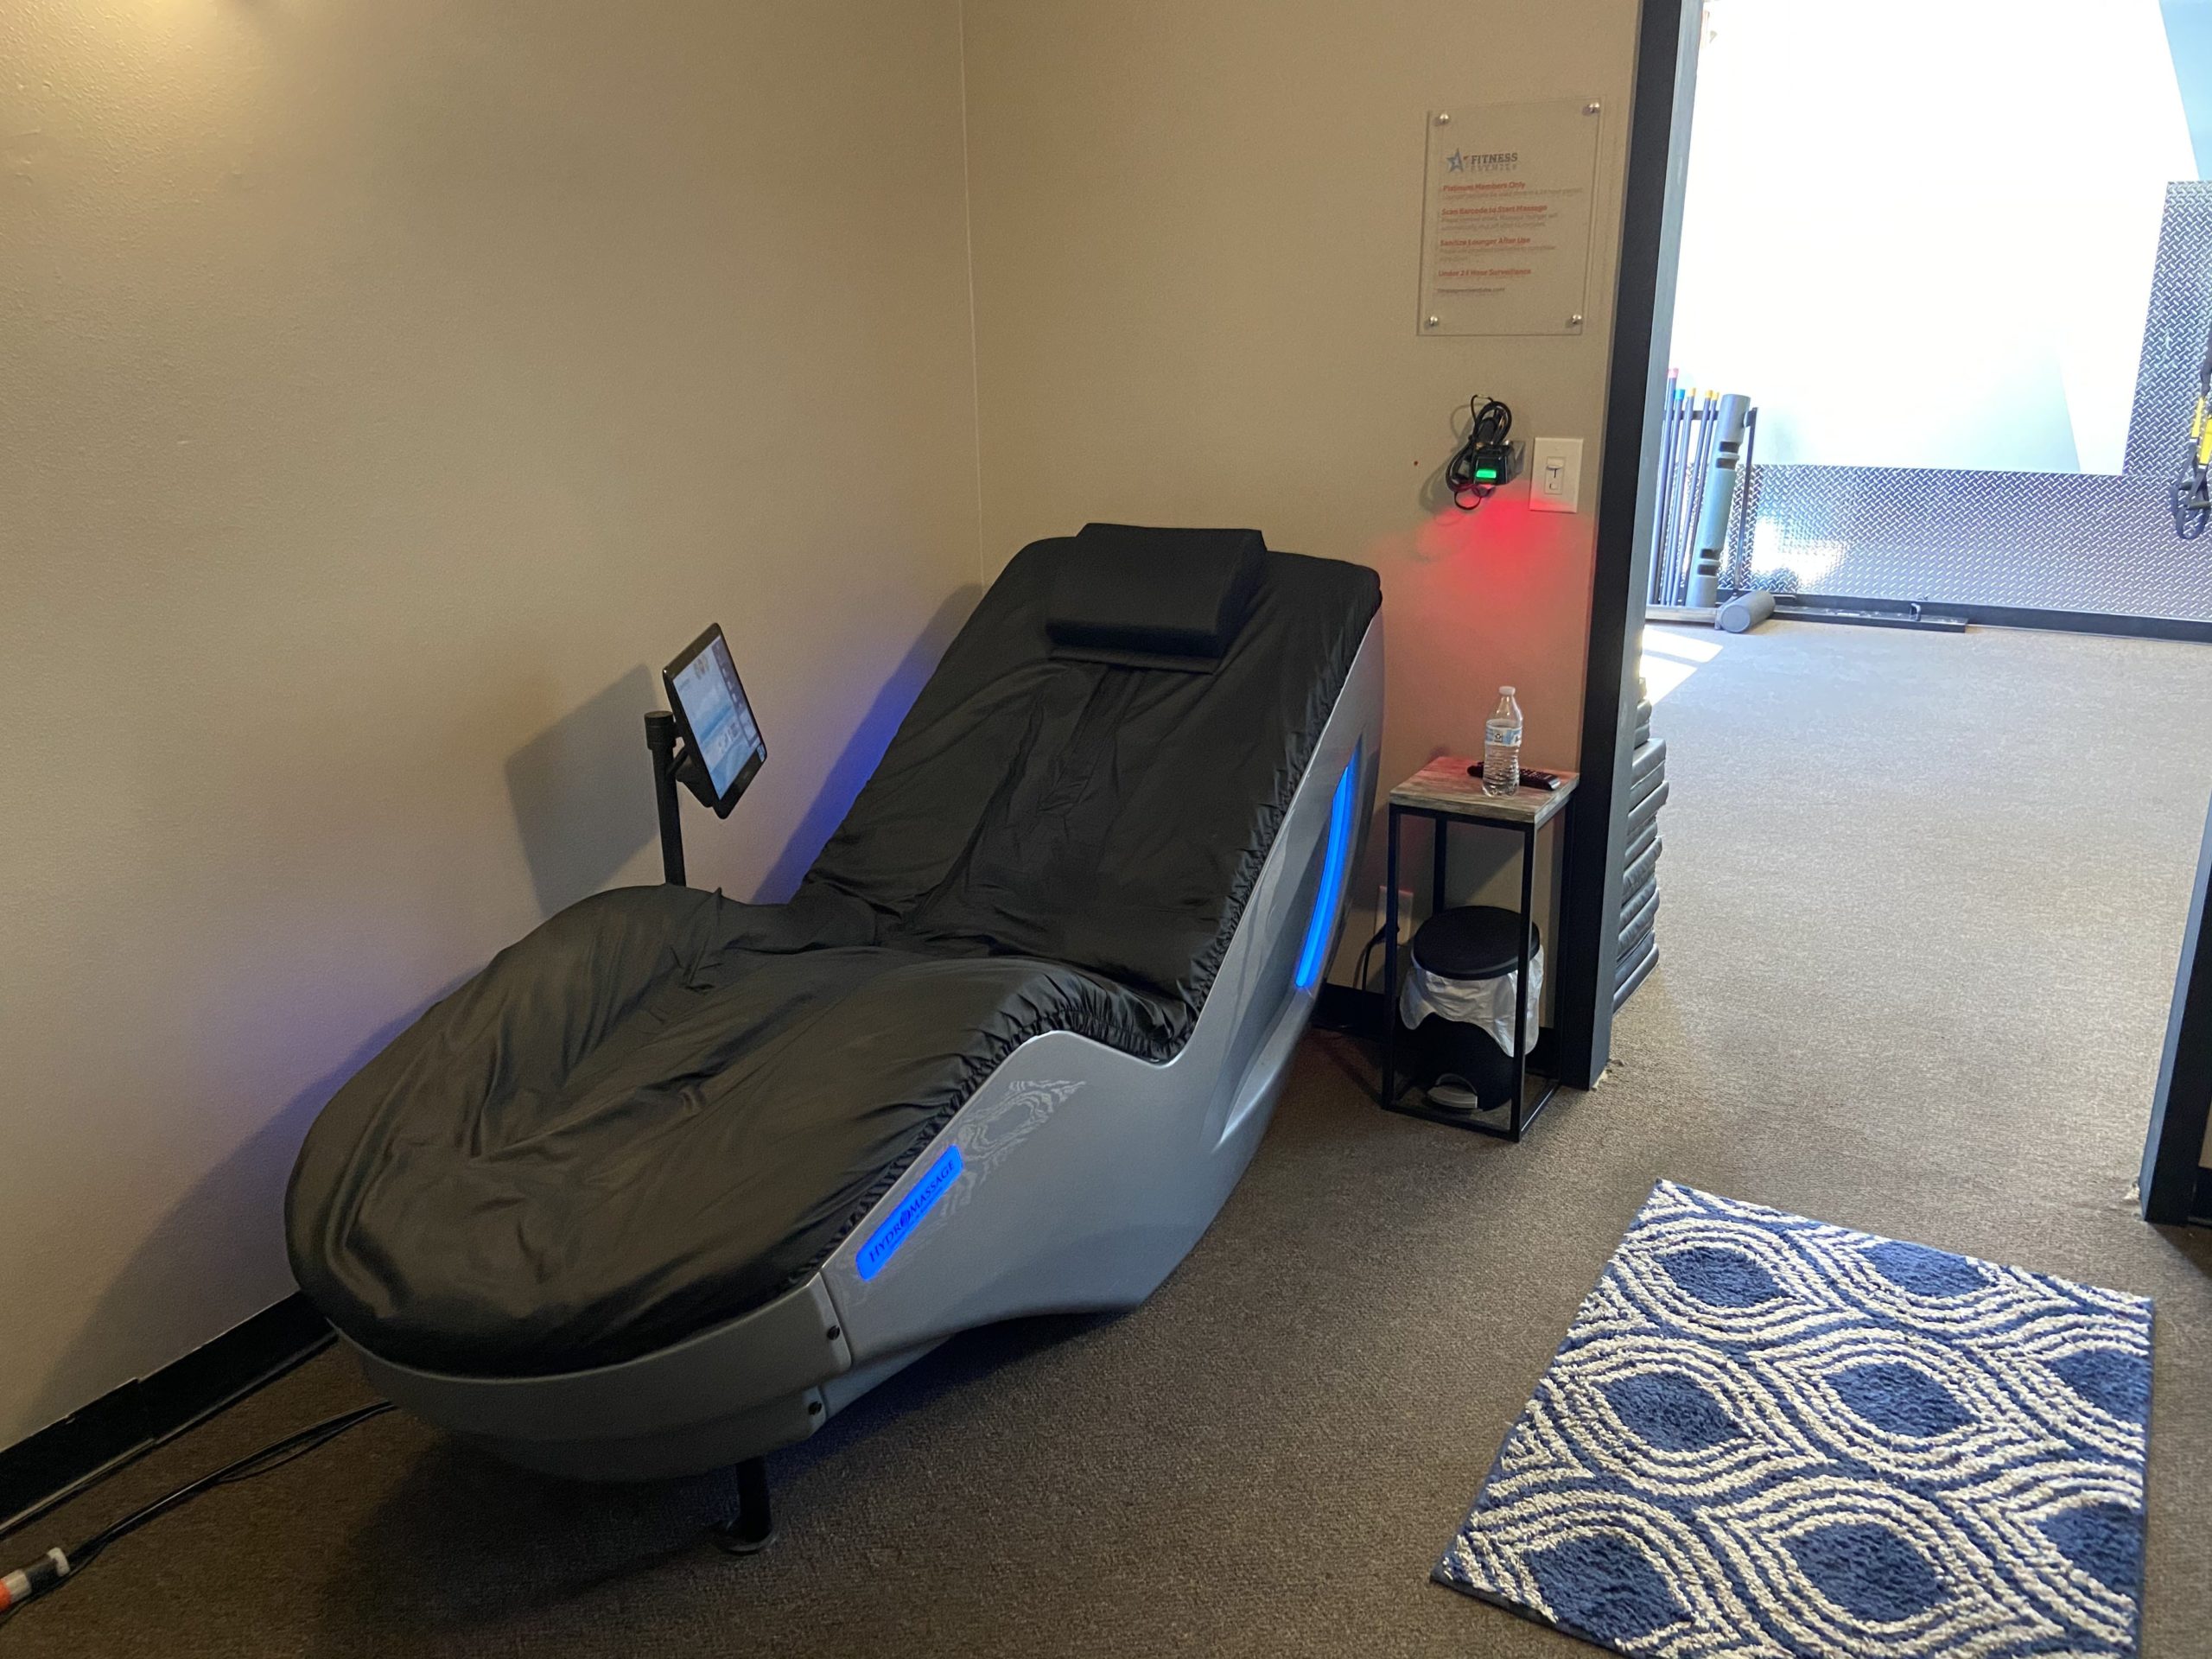 Hydromassage Lounge at Fitness Premier Clubs in Bourbonnais scaled